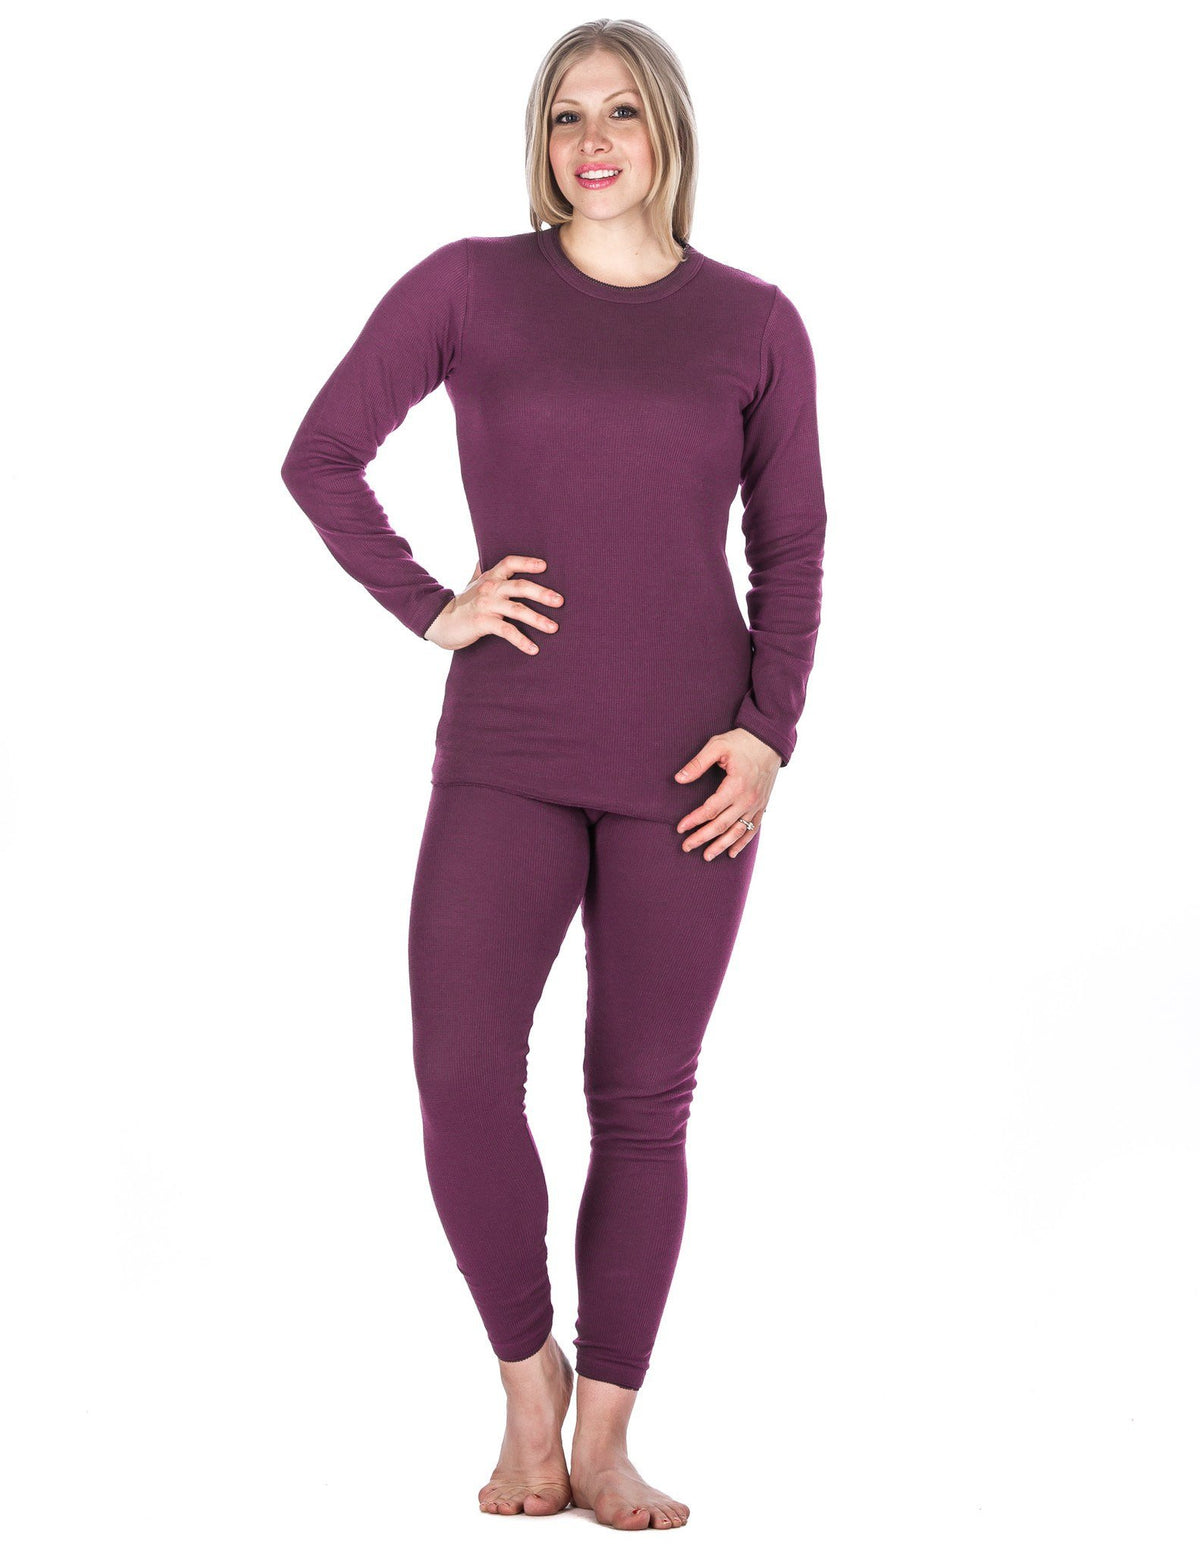 Women's Classic Waffle Knit Thermal Top and Bottom Set - Purple